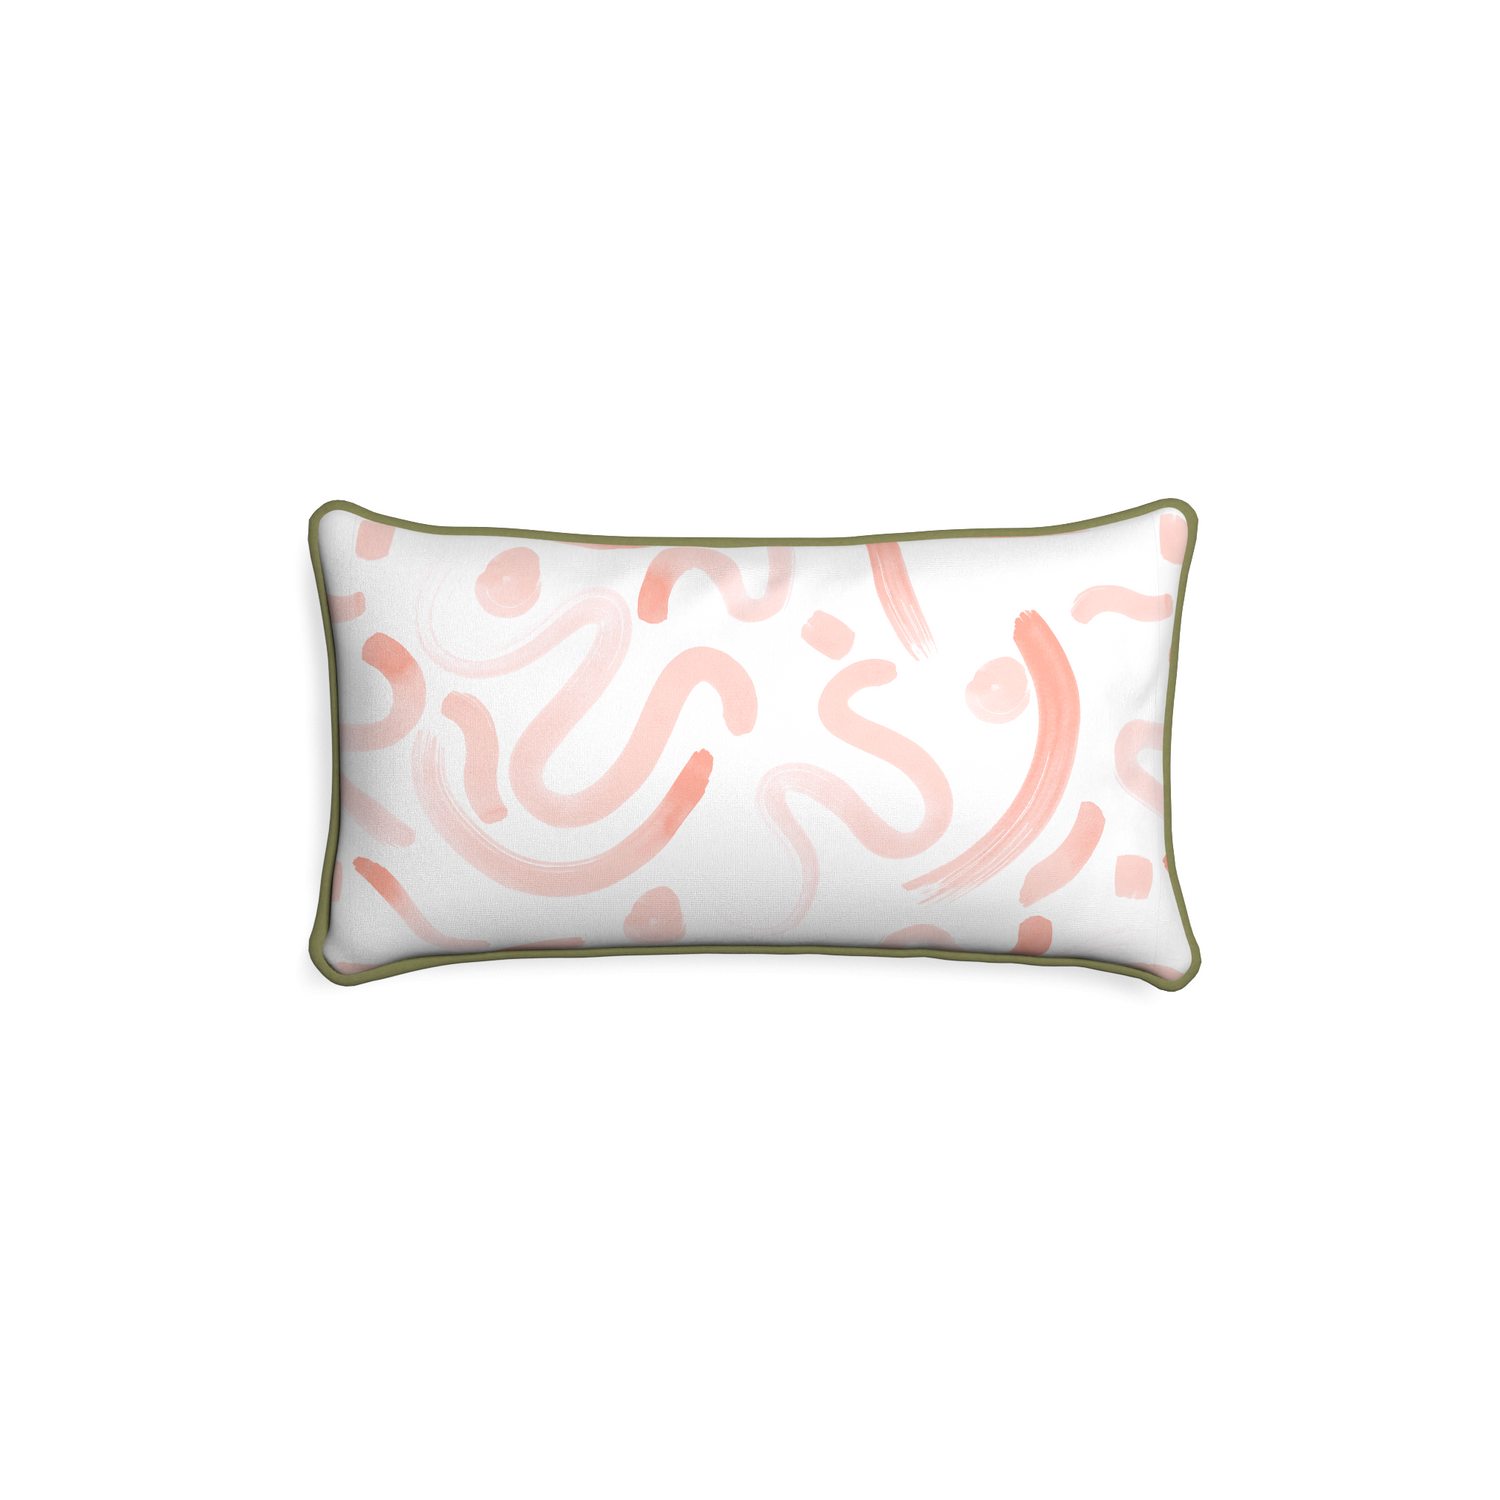 Petite-lumbar hockney pink custom pink graphicpillow with moss piping on white background